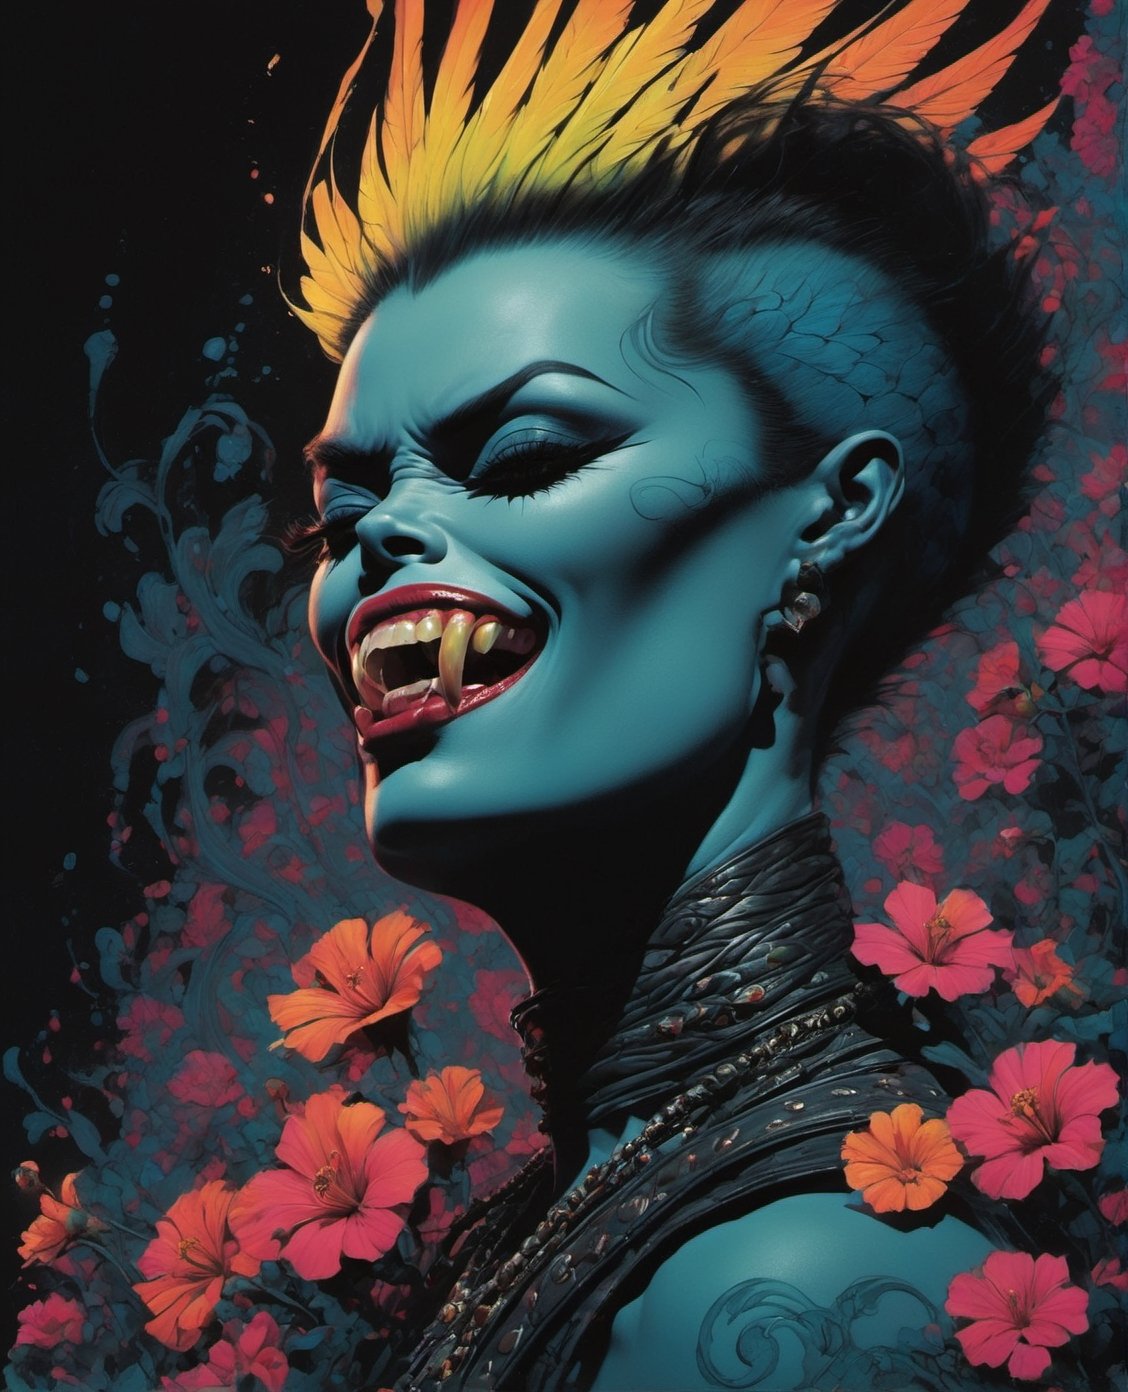 vogue hernan Munster portrait, Horror Comics style, art by brom, smiling, tongue ot, poking tongue at viewer, lennon sunglasses, punk hairdo, tattoo by ed hardy, shaved hair, neck tattoos by andy warhol, heavily muscled, biceps, glam gore, horror, poster style, flower garden, oversized monarch butterflies, tropical fish, flower garden, ,close up,ct-niji2,action shot